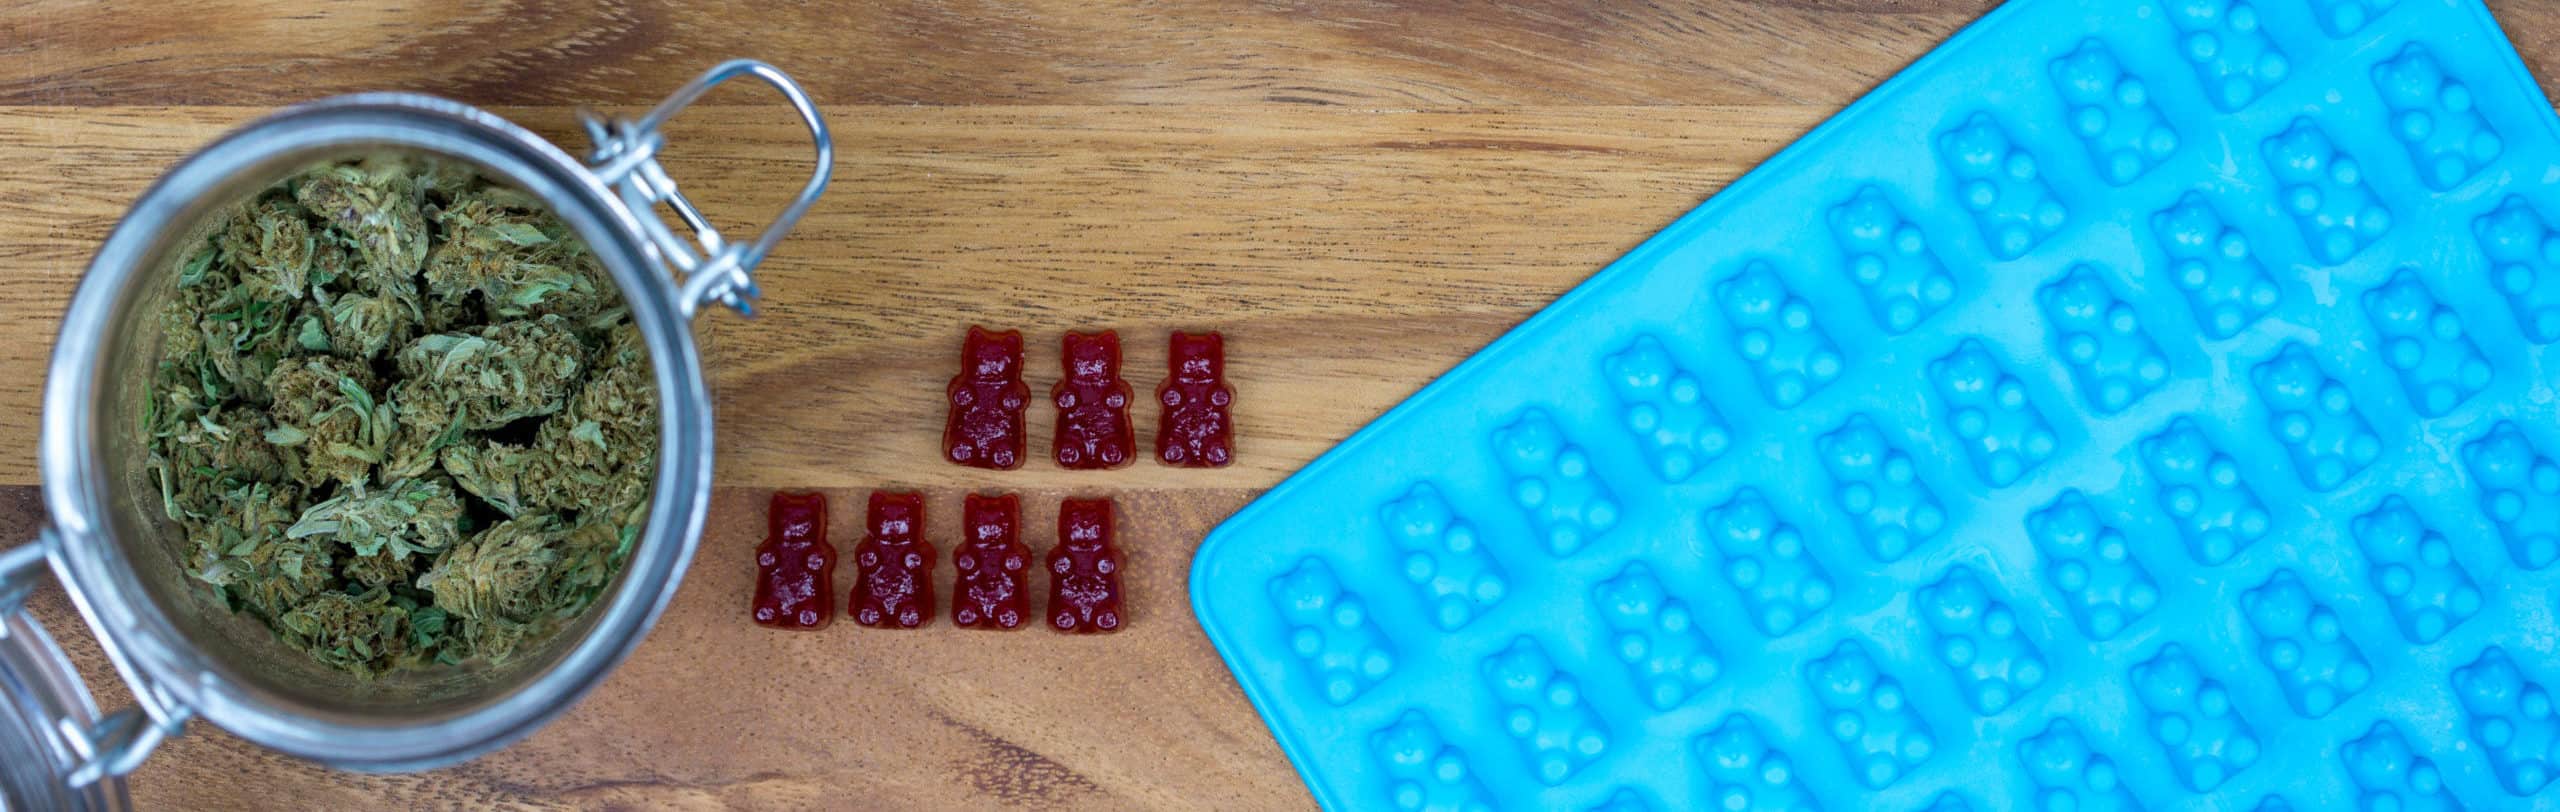 How to Make THC Sour Gummy Bears Infused with RSO/FECO. You need a silicone gummy bear candy mold or your choice of shapes. 